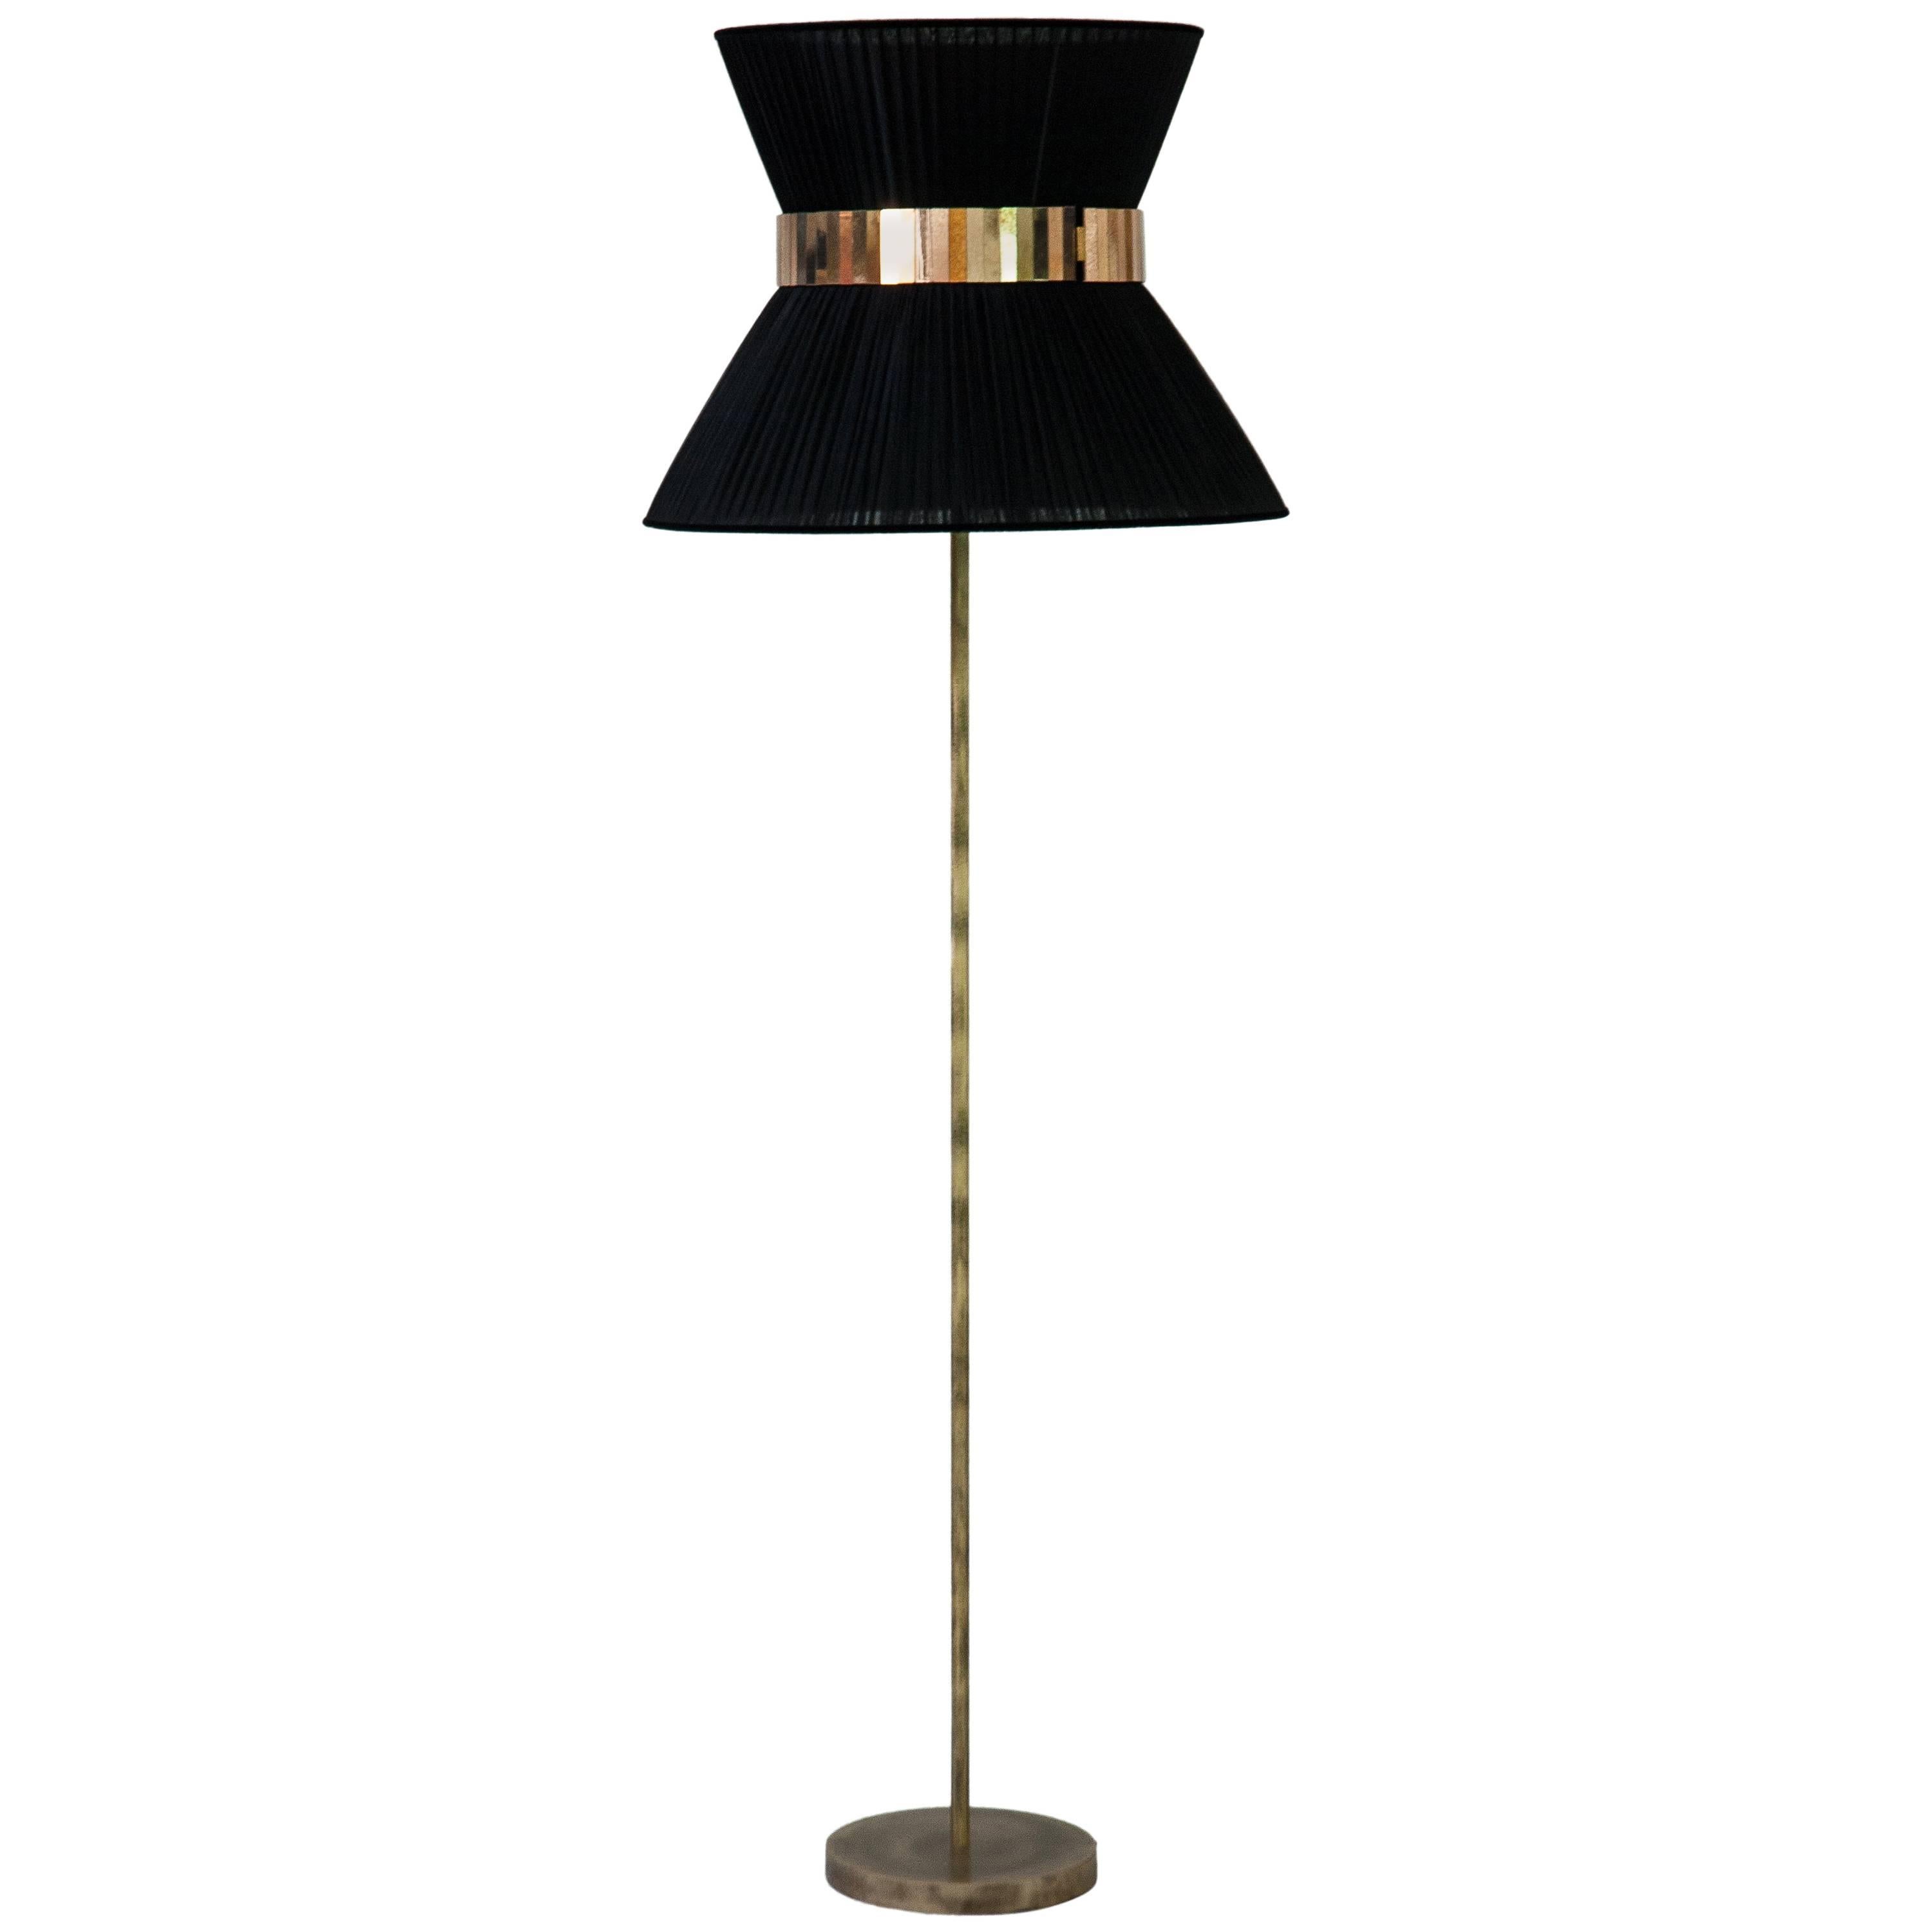  Tiffany contemporary Floor Lamp black Silk, Antiqued Brass, Silvered Glass  